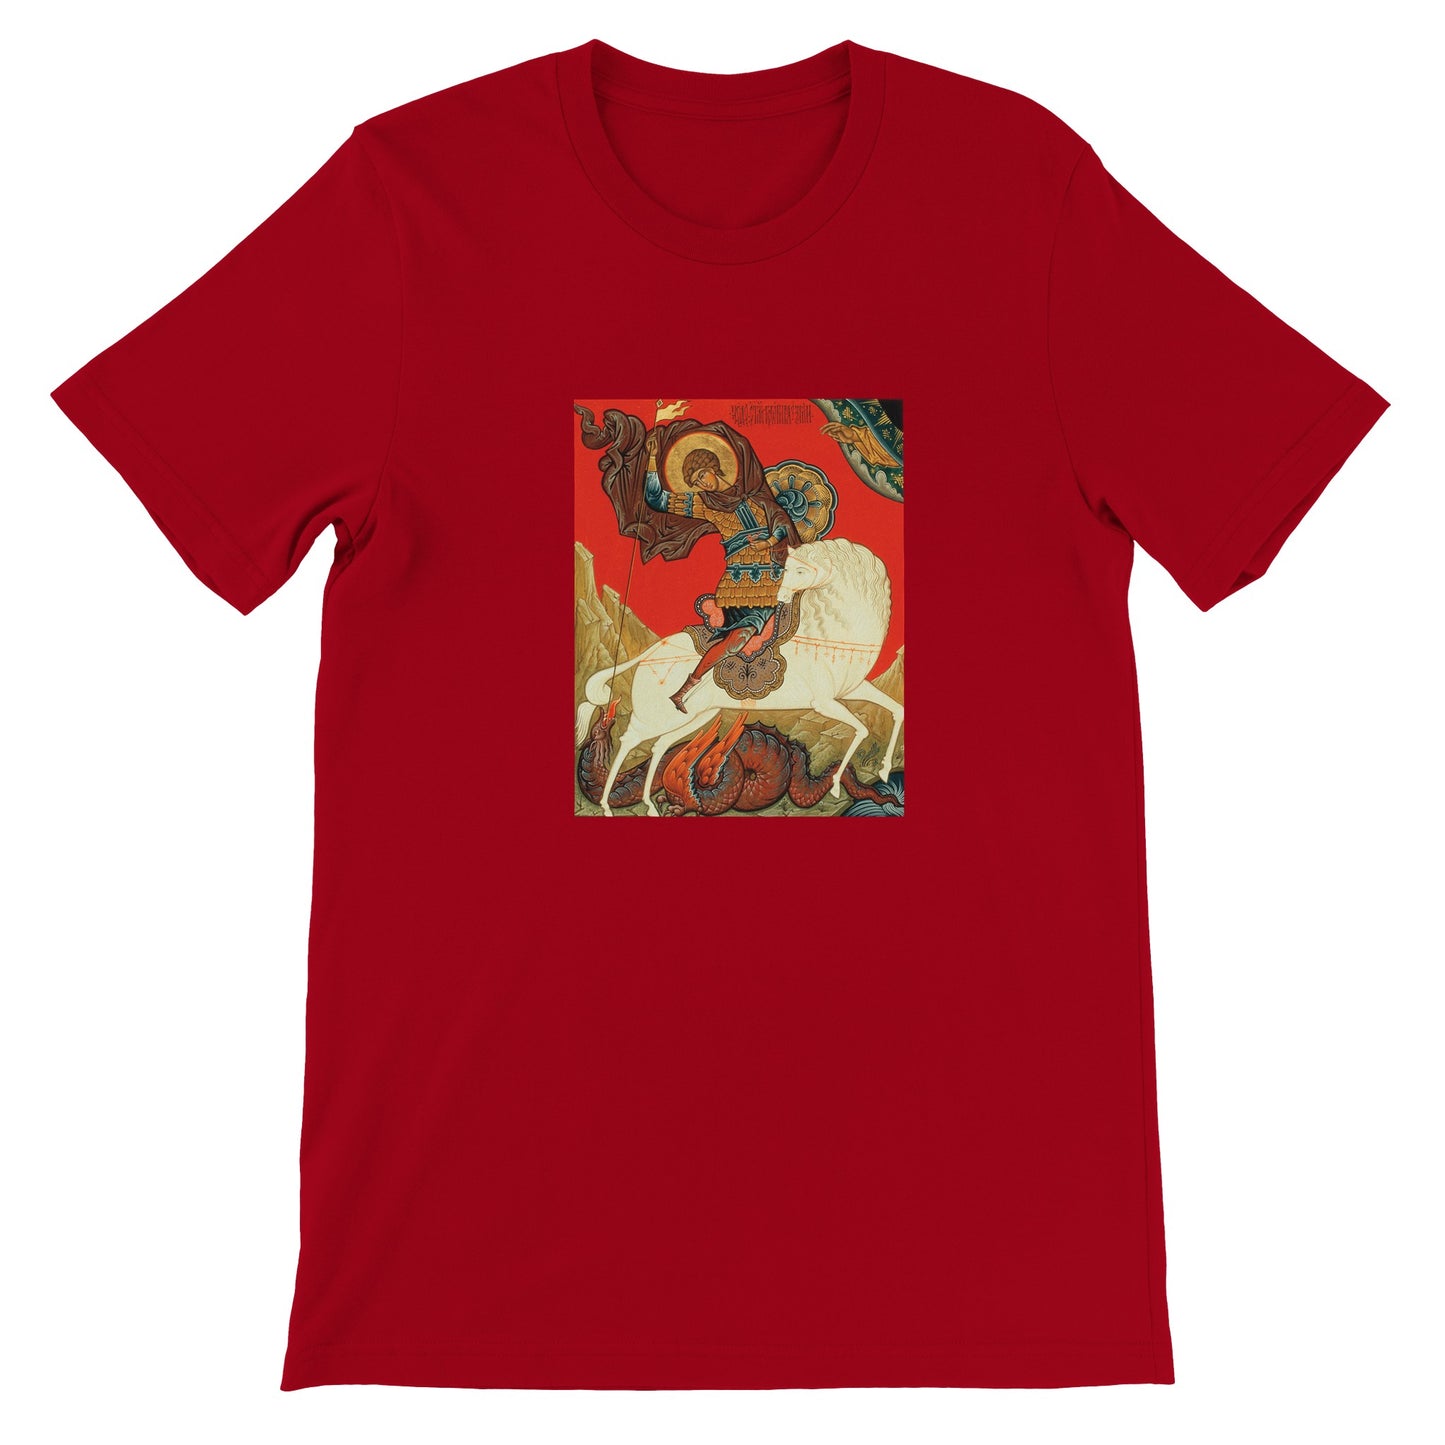 a red t - shirt with a painting of a man riding a horse